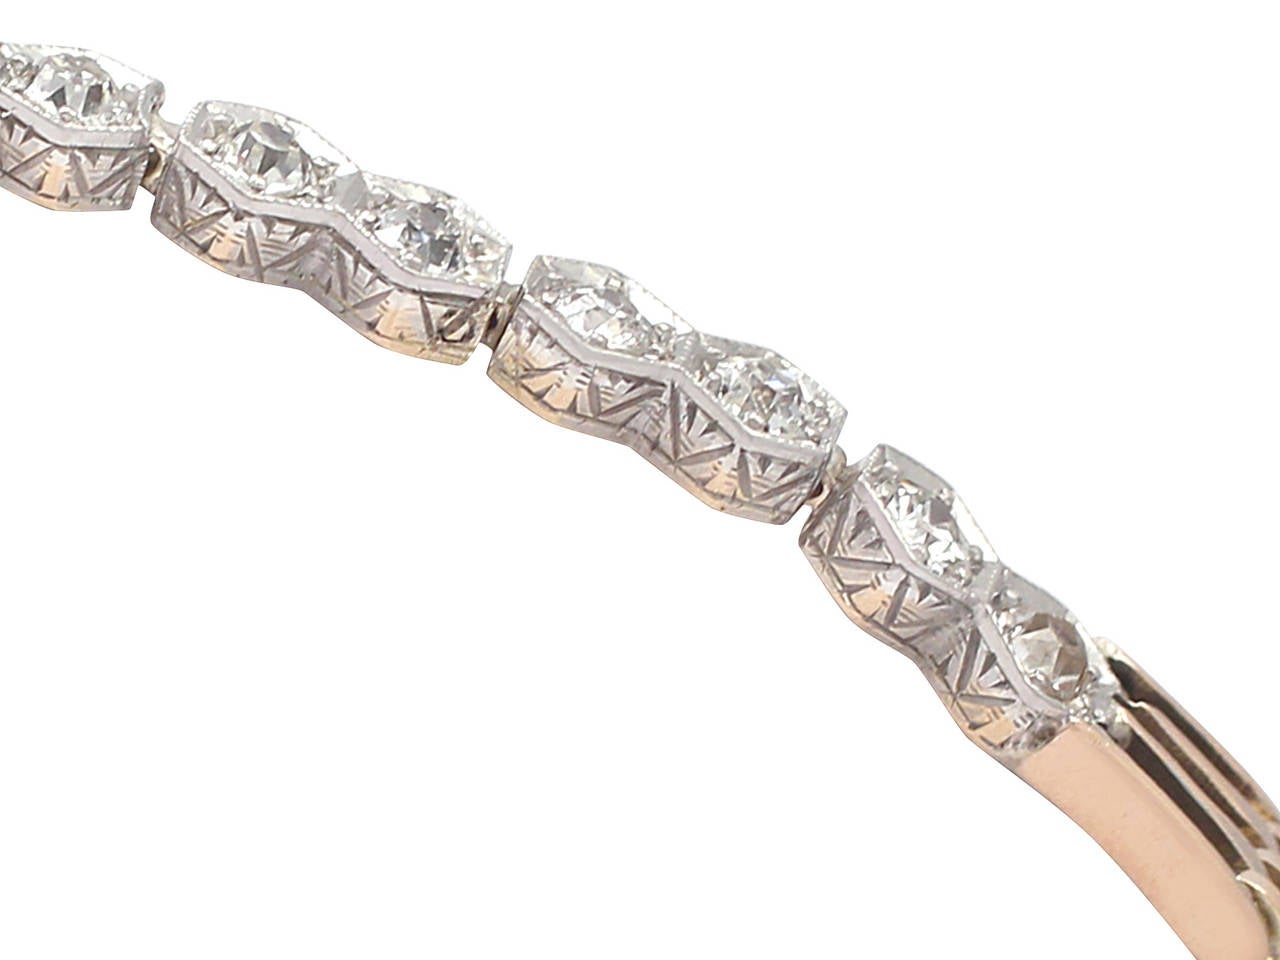 A fine and impressive 0.62 carat diamond, 15 karat yellow gold, 15 karat white gold set bracelet; part of our diverse antique jewelry and estate jewelry collections

This impressive original antique diamond bracelet has been crafted in 15k yellow